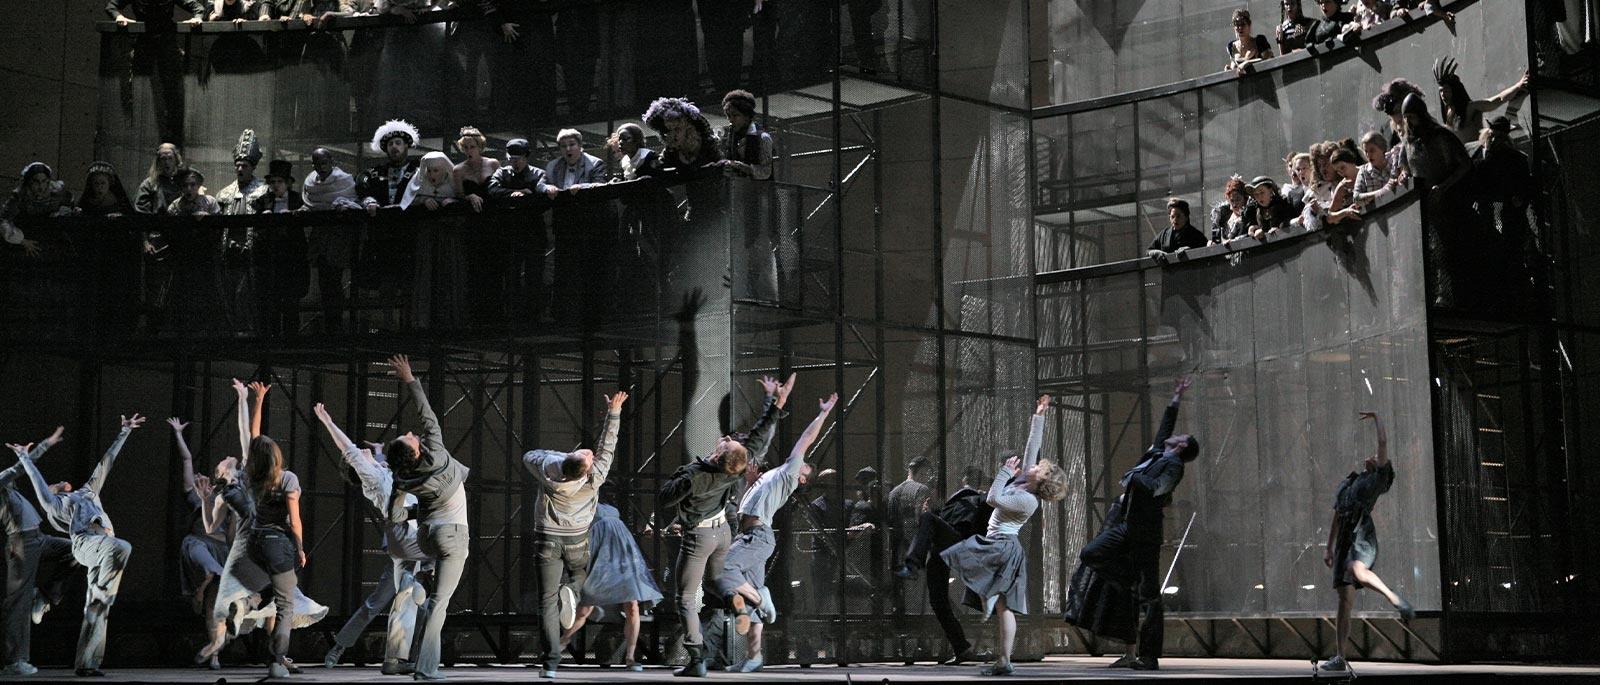 Scene from Orfeo ed Eurdice where there are dancers on the stage with other cast members on risers behind them, looking down and watching